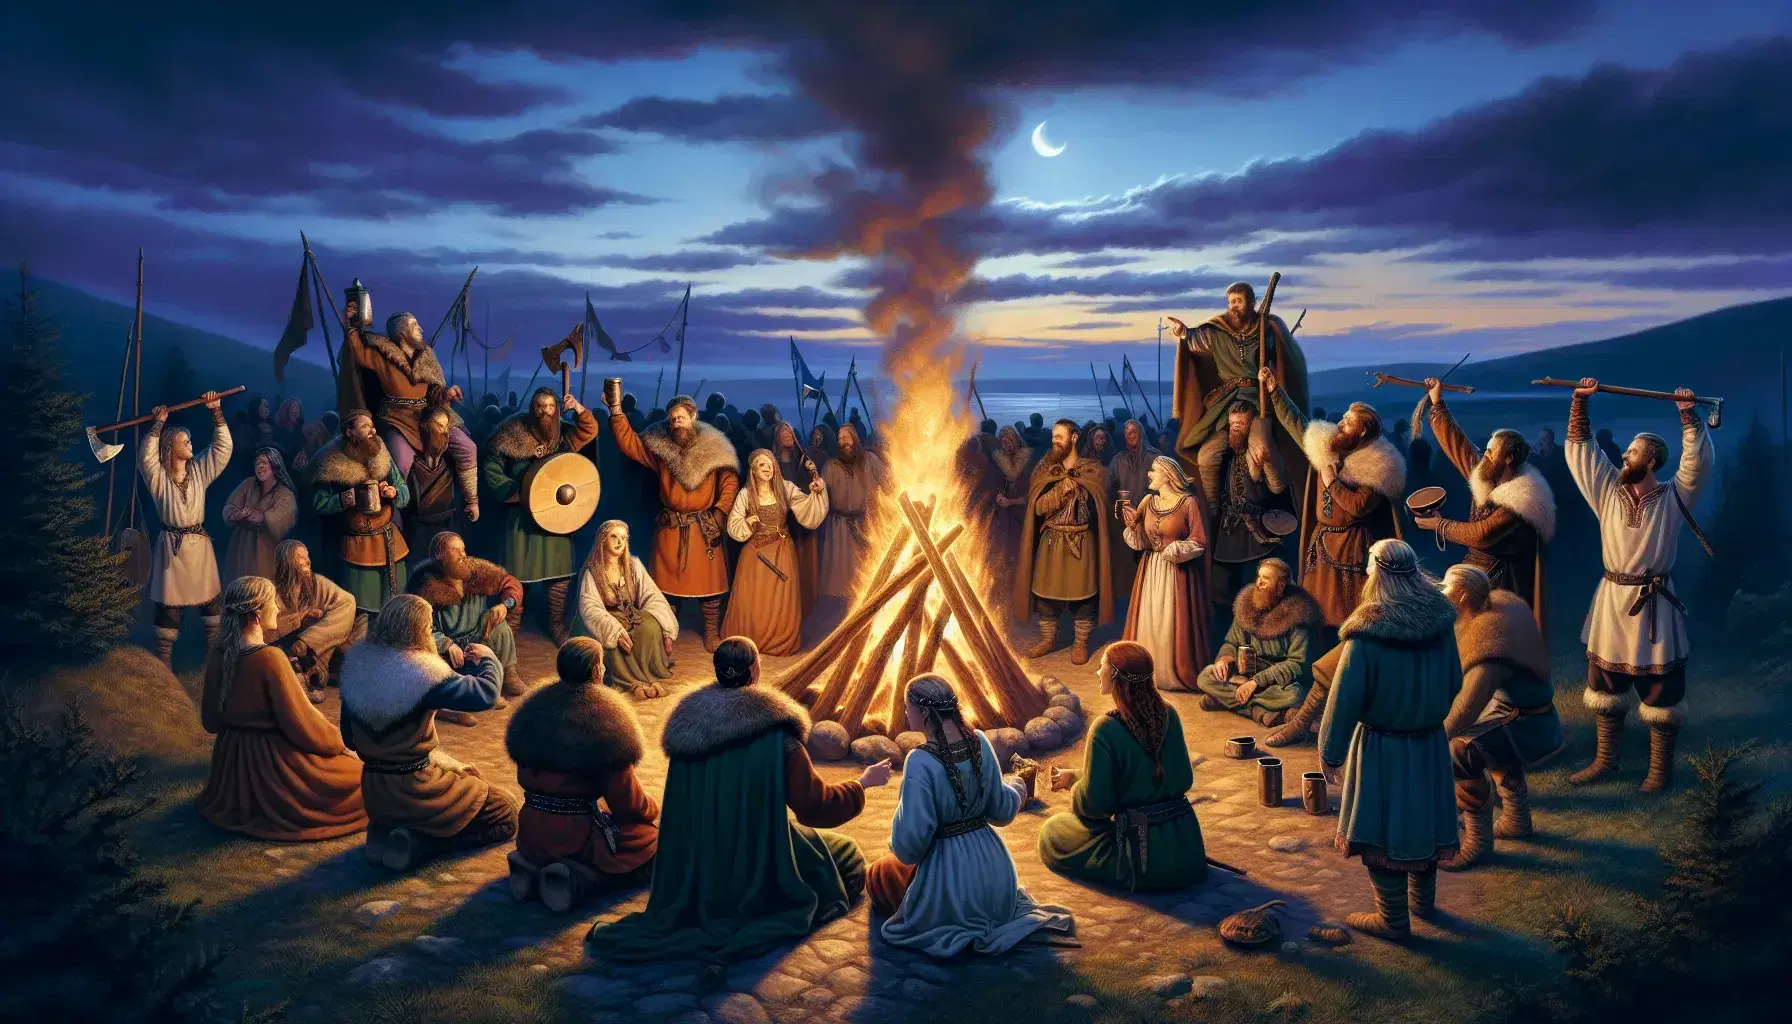 Viking reenactors celebrate around a bonfire at twilight, with traditional music, dance, and a toast, set against a backdrop of a darkening sky.